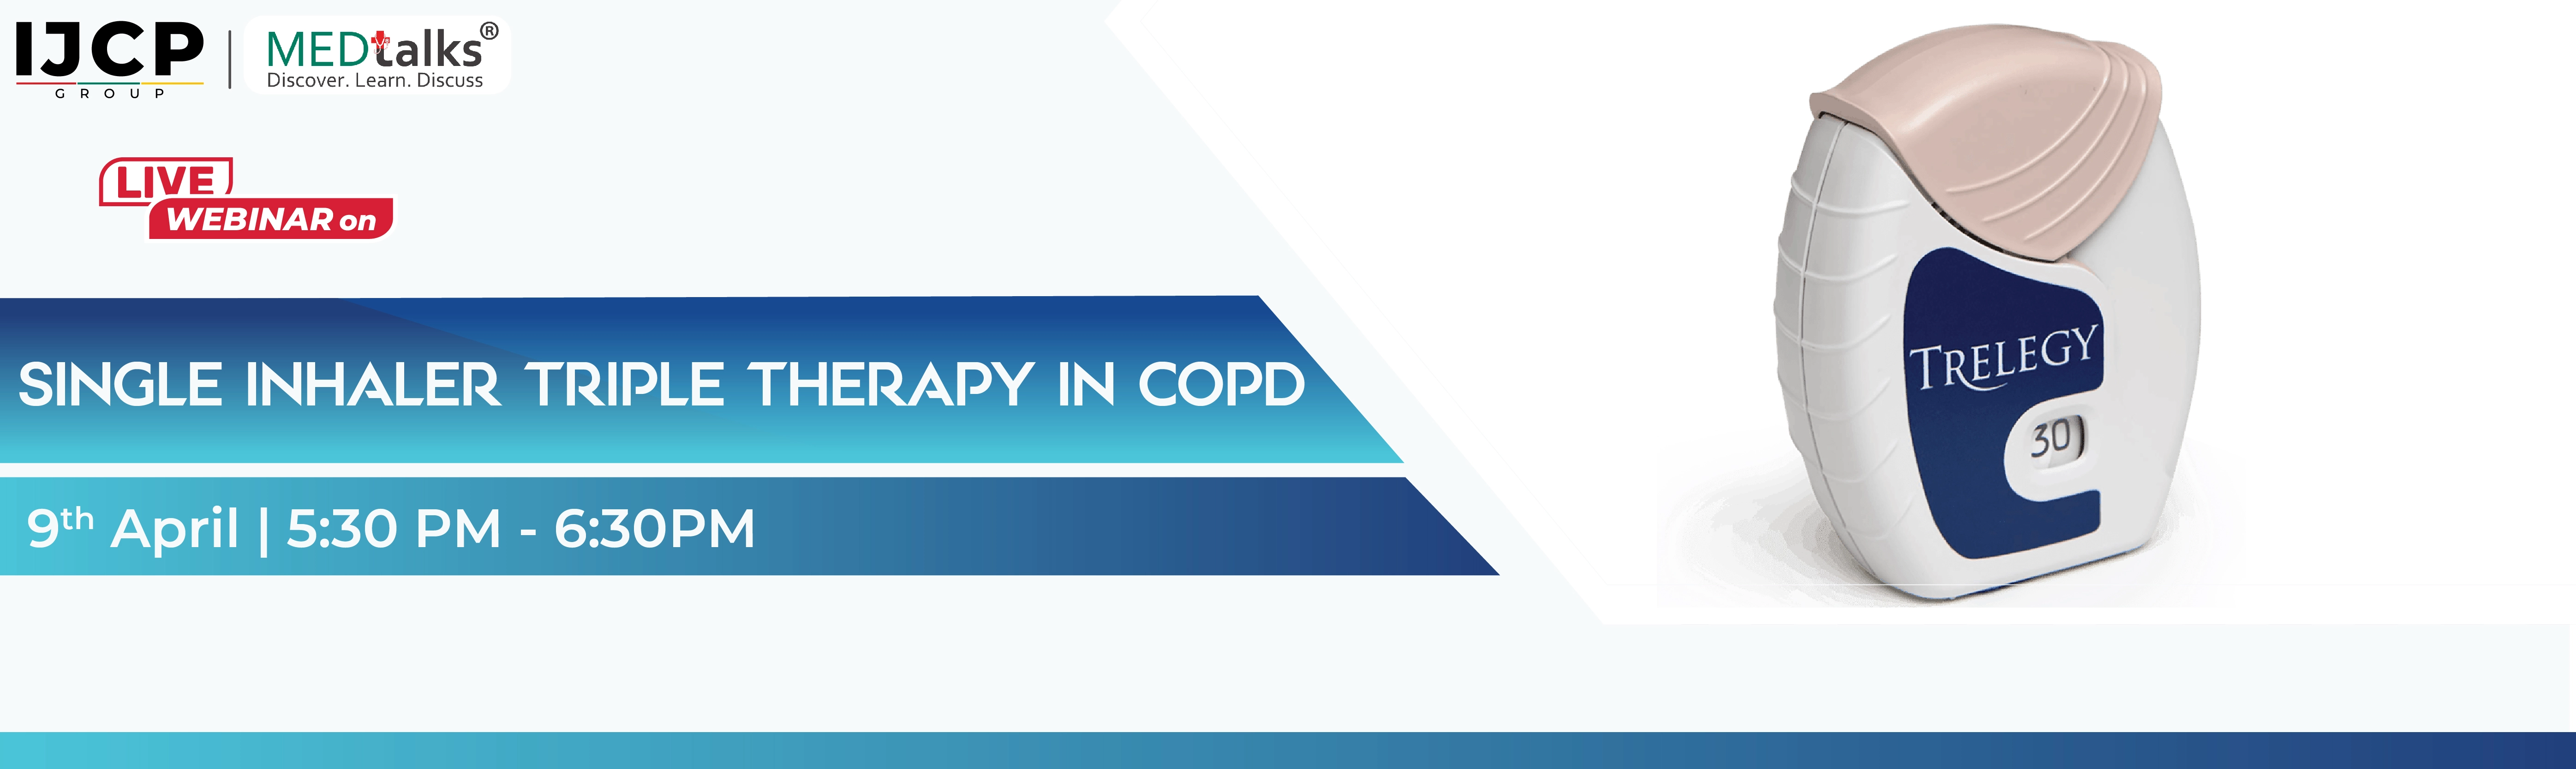 Single inhaler triple therapy in COPD